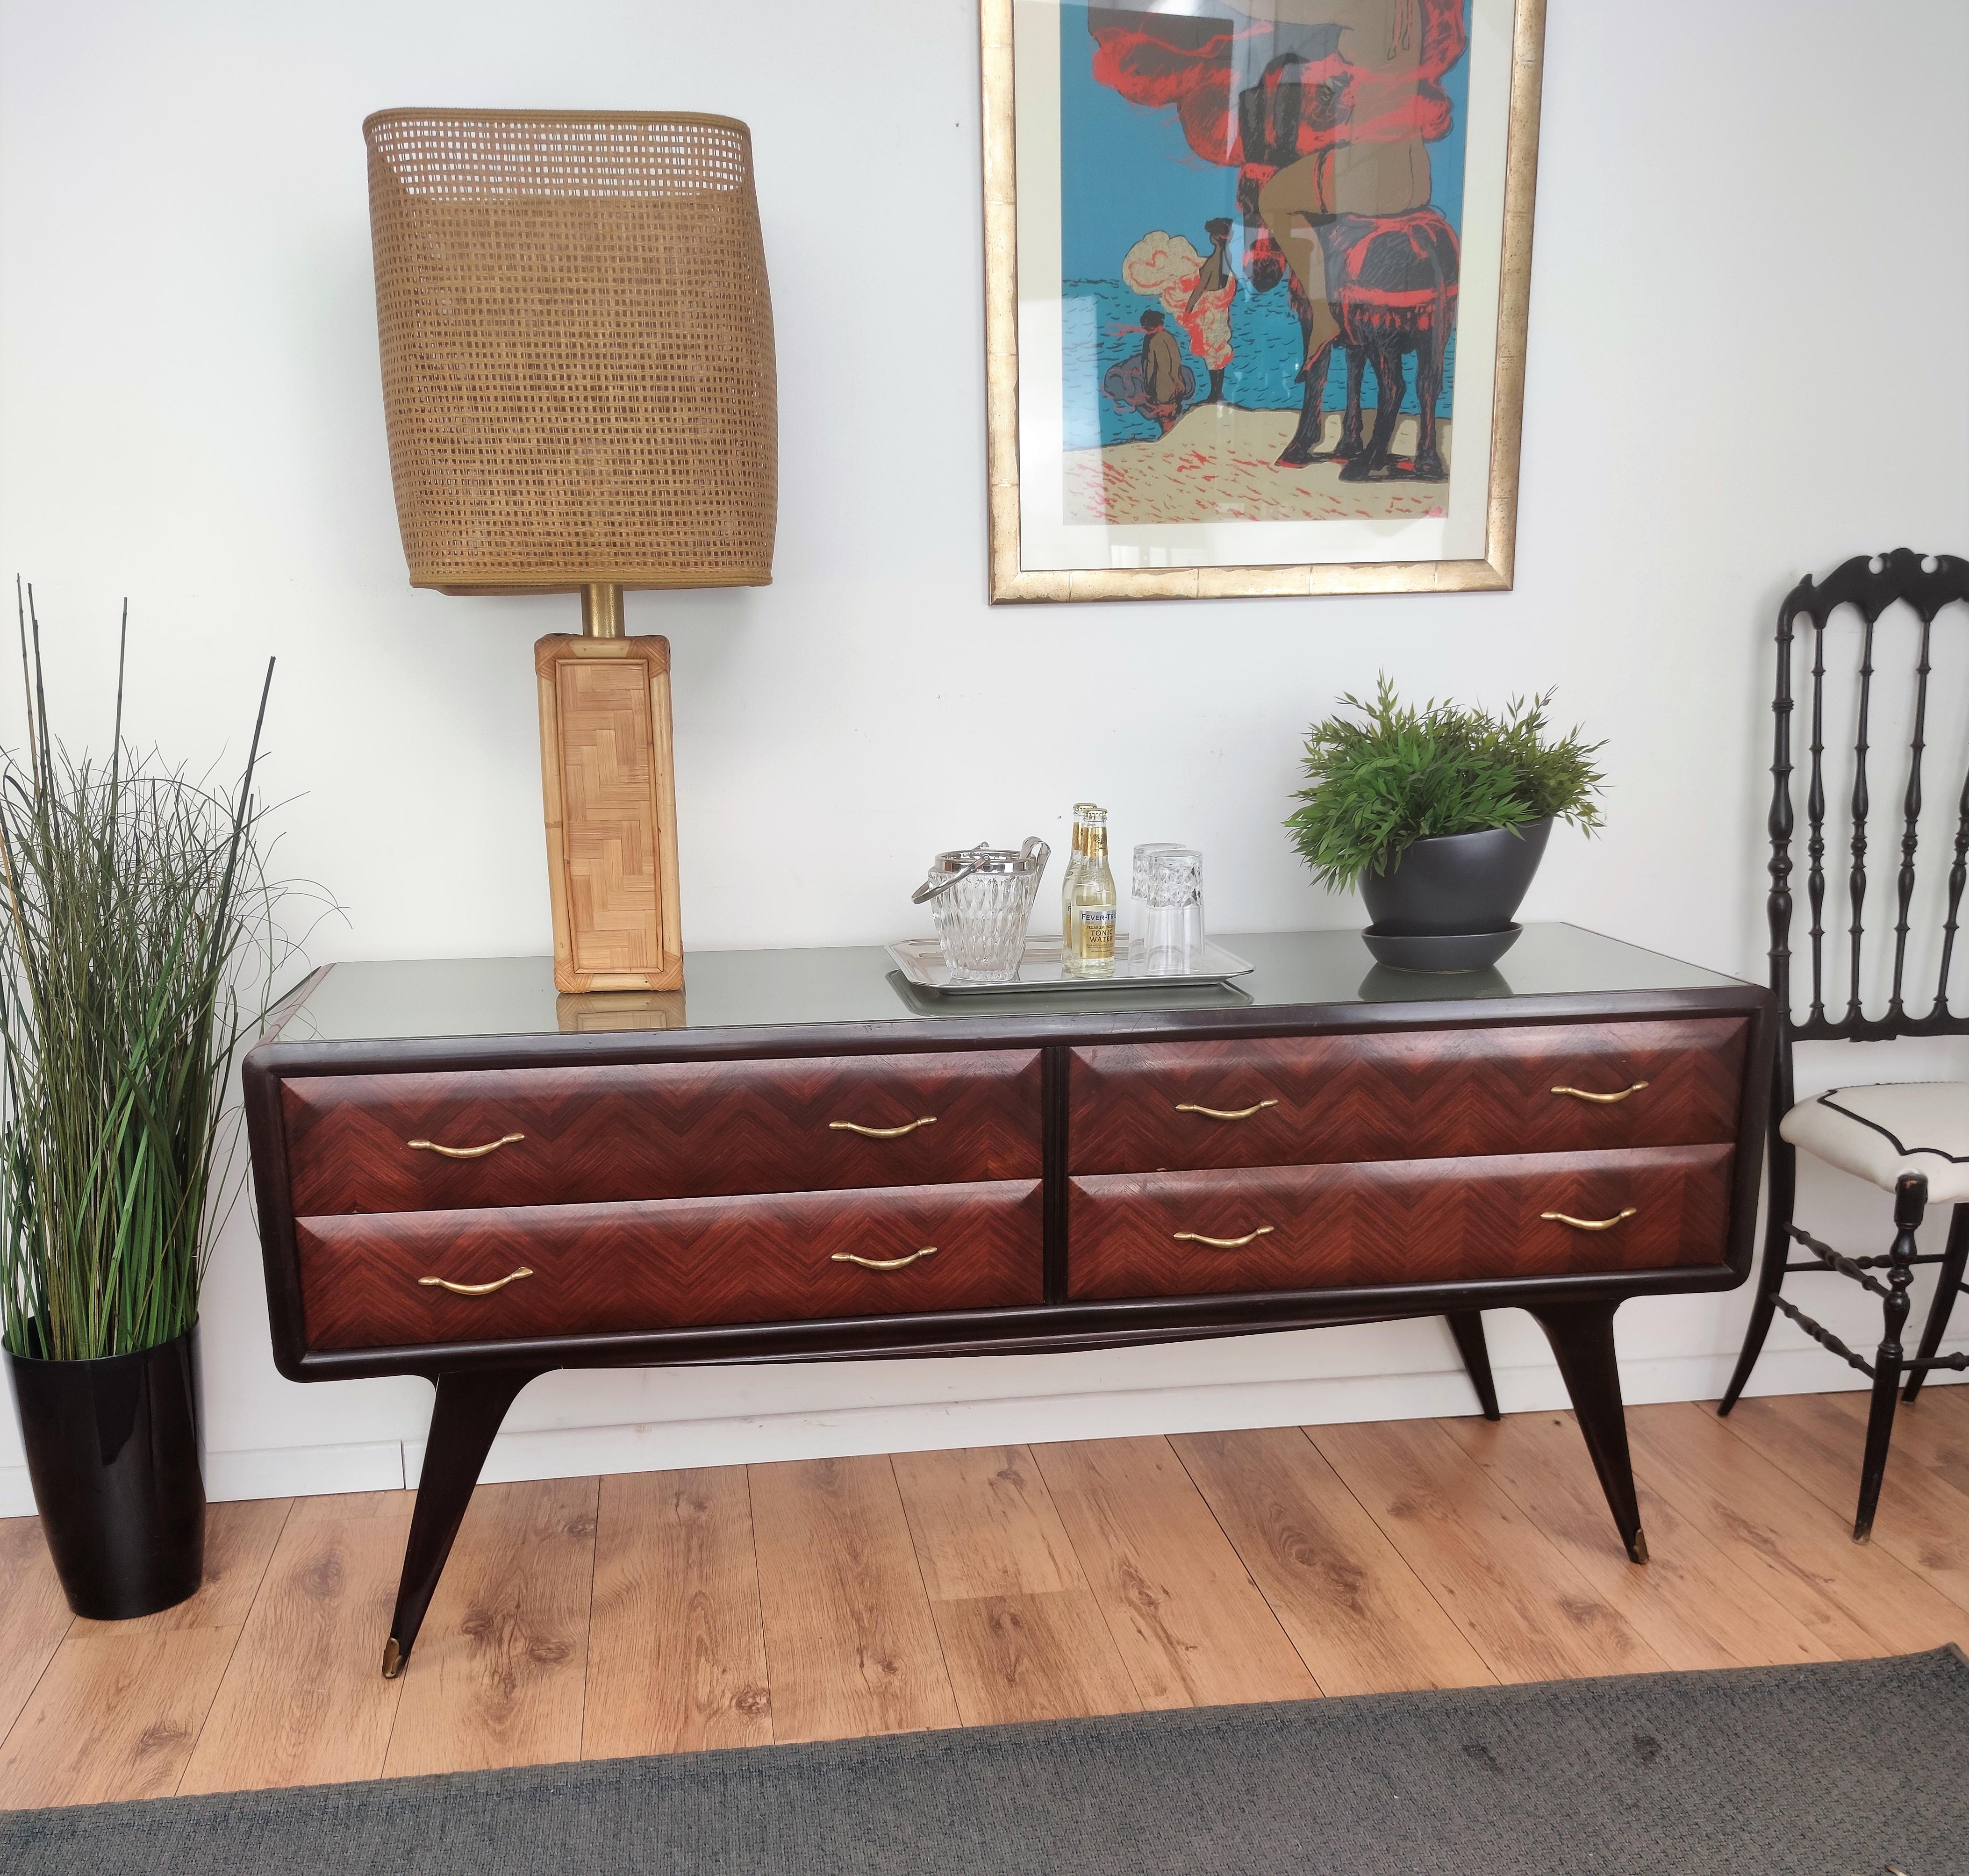 Beautiful Italian 1950s sideboard, credenza, buffet or chest of drawers with elegant and classic wood worked according its natural graining on the 4 drawers frontal drawers with the grey glass top and the final touch details of the original gilt